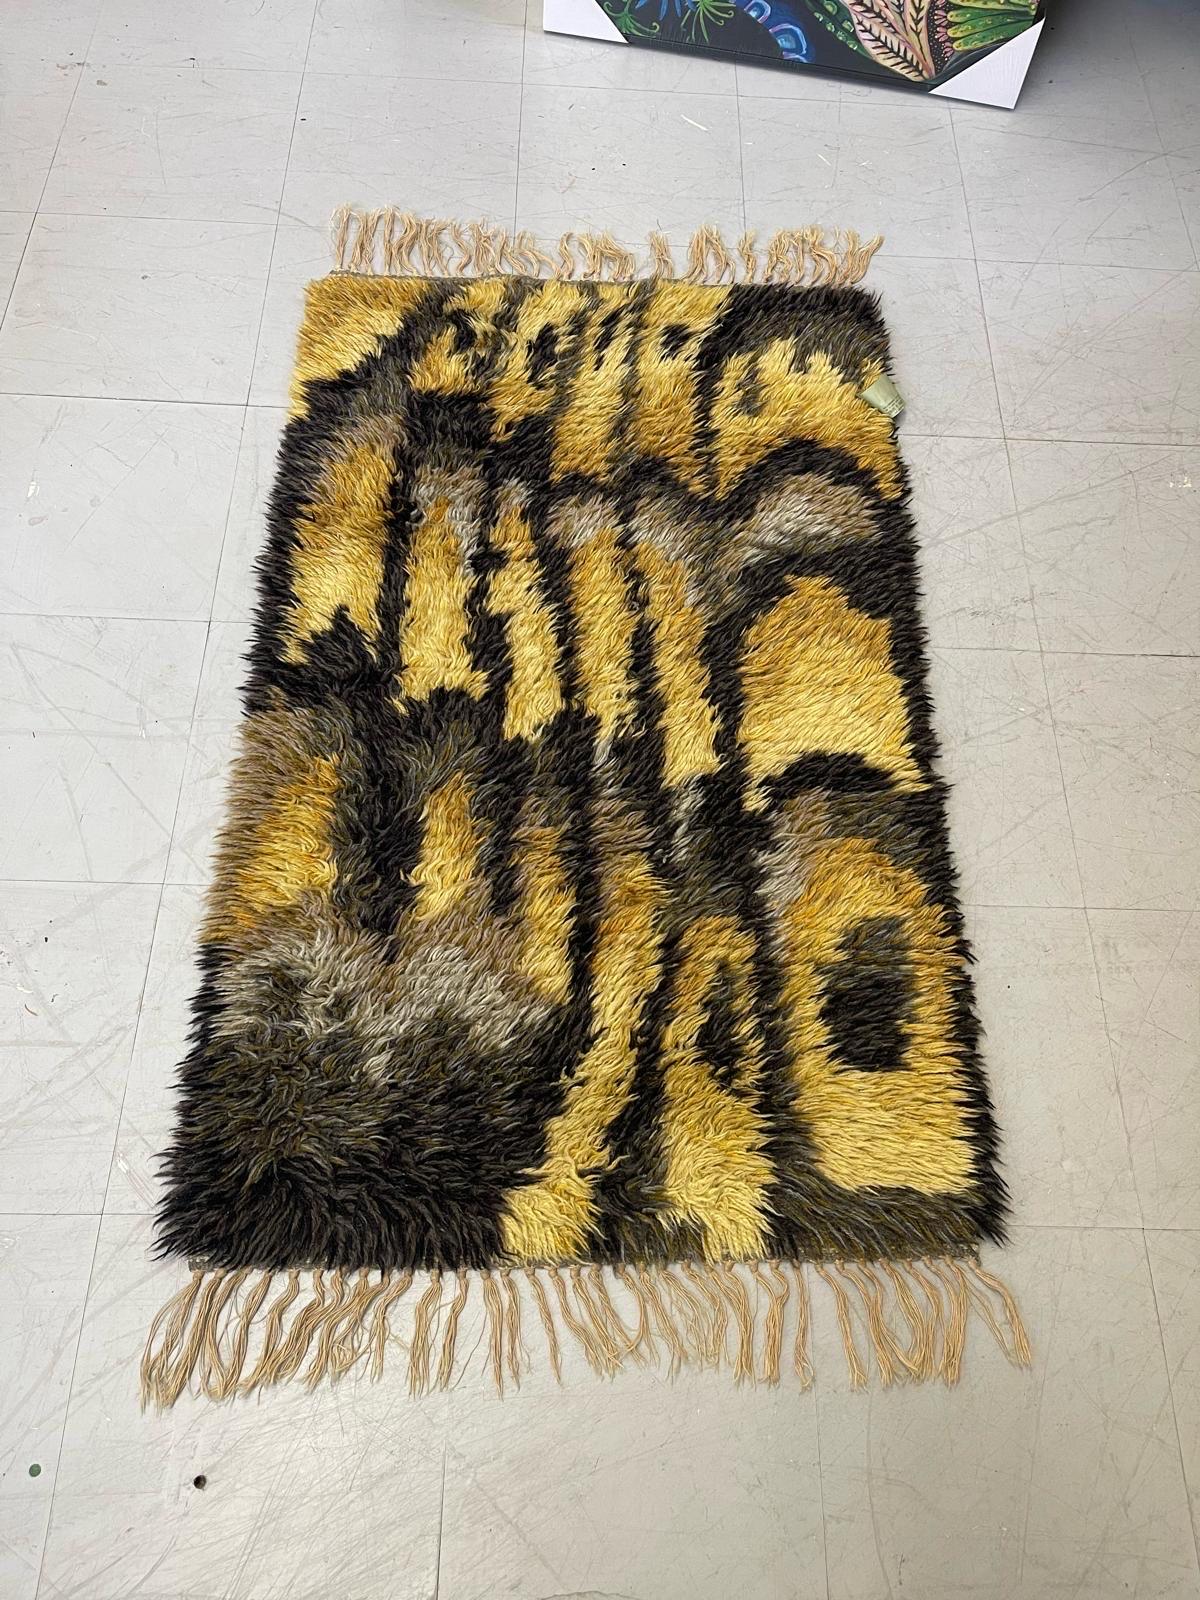 This Vintage Piece is in the Style of Rya Rugs, a Scandinavian Mid Century Company. The Tag Attached is from a Previous Rug Cleaning. This Rug has Tassels on the Two Shorter Sides. Vintage Condition Consistent with Age as Pictured.

Dimensions. 38 L